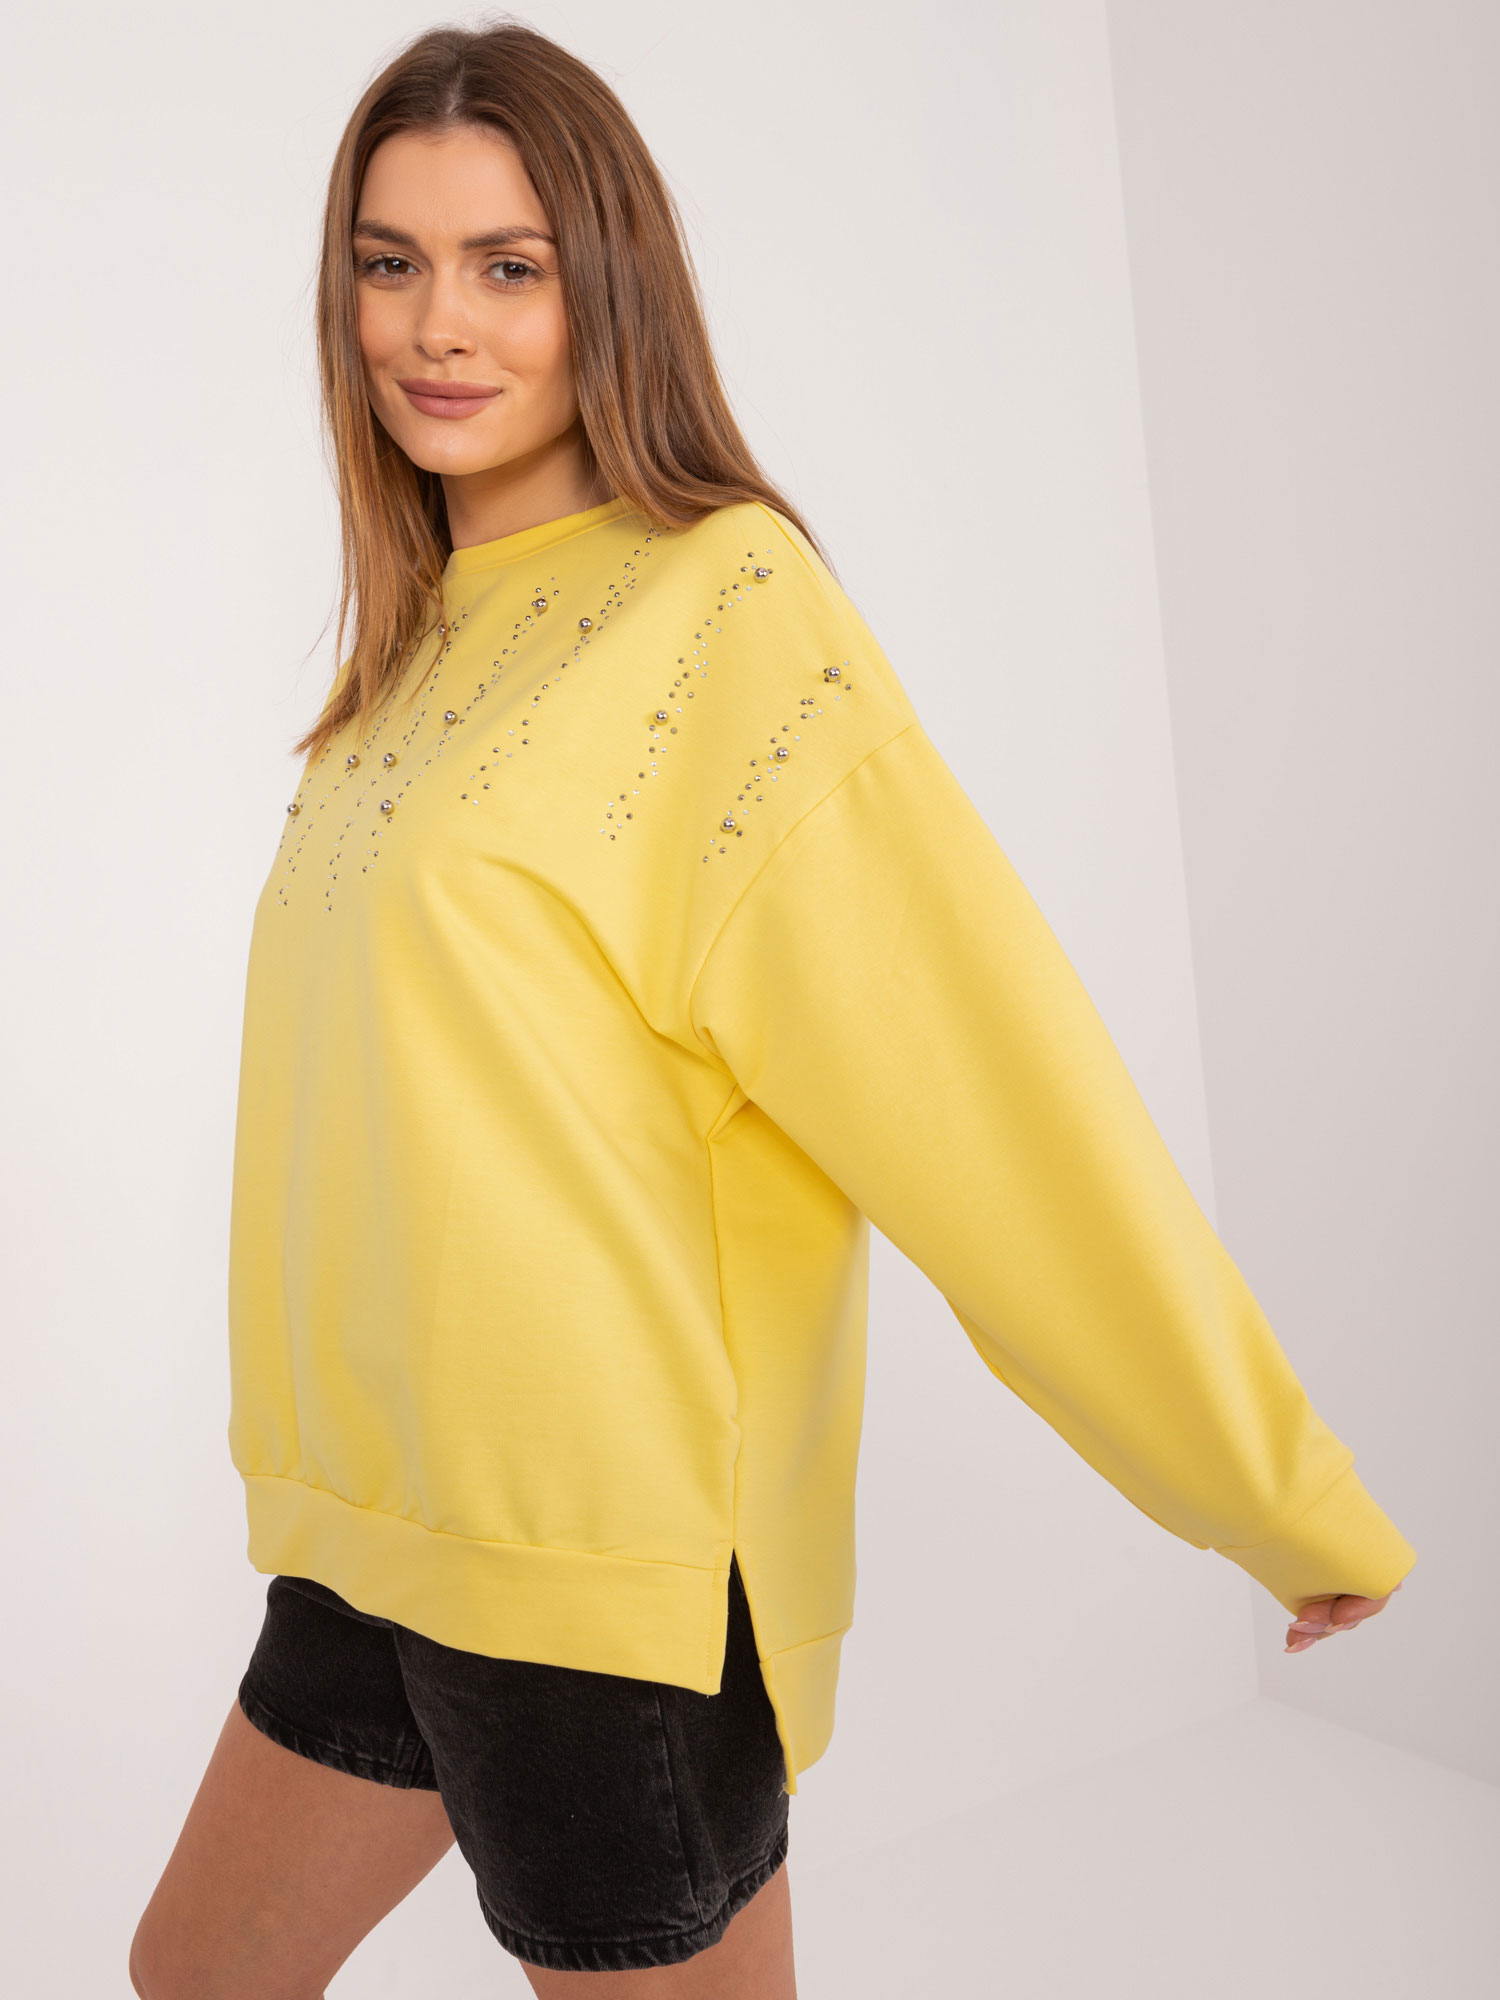 Yellow hoodie with appliqués